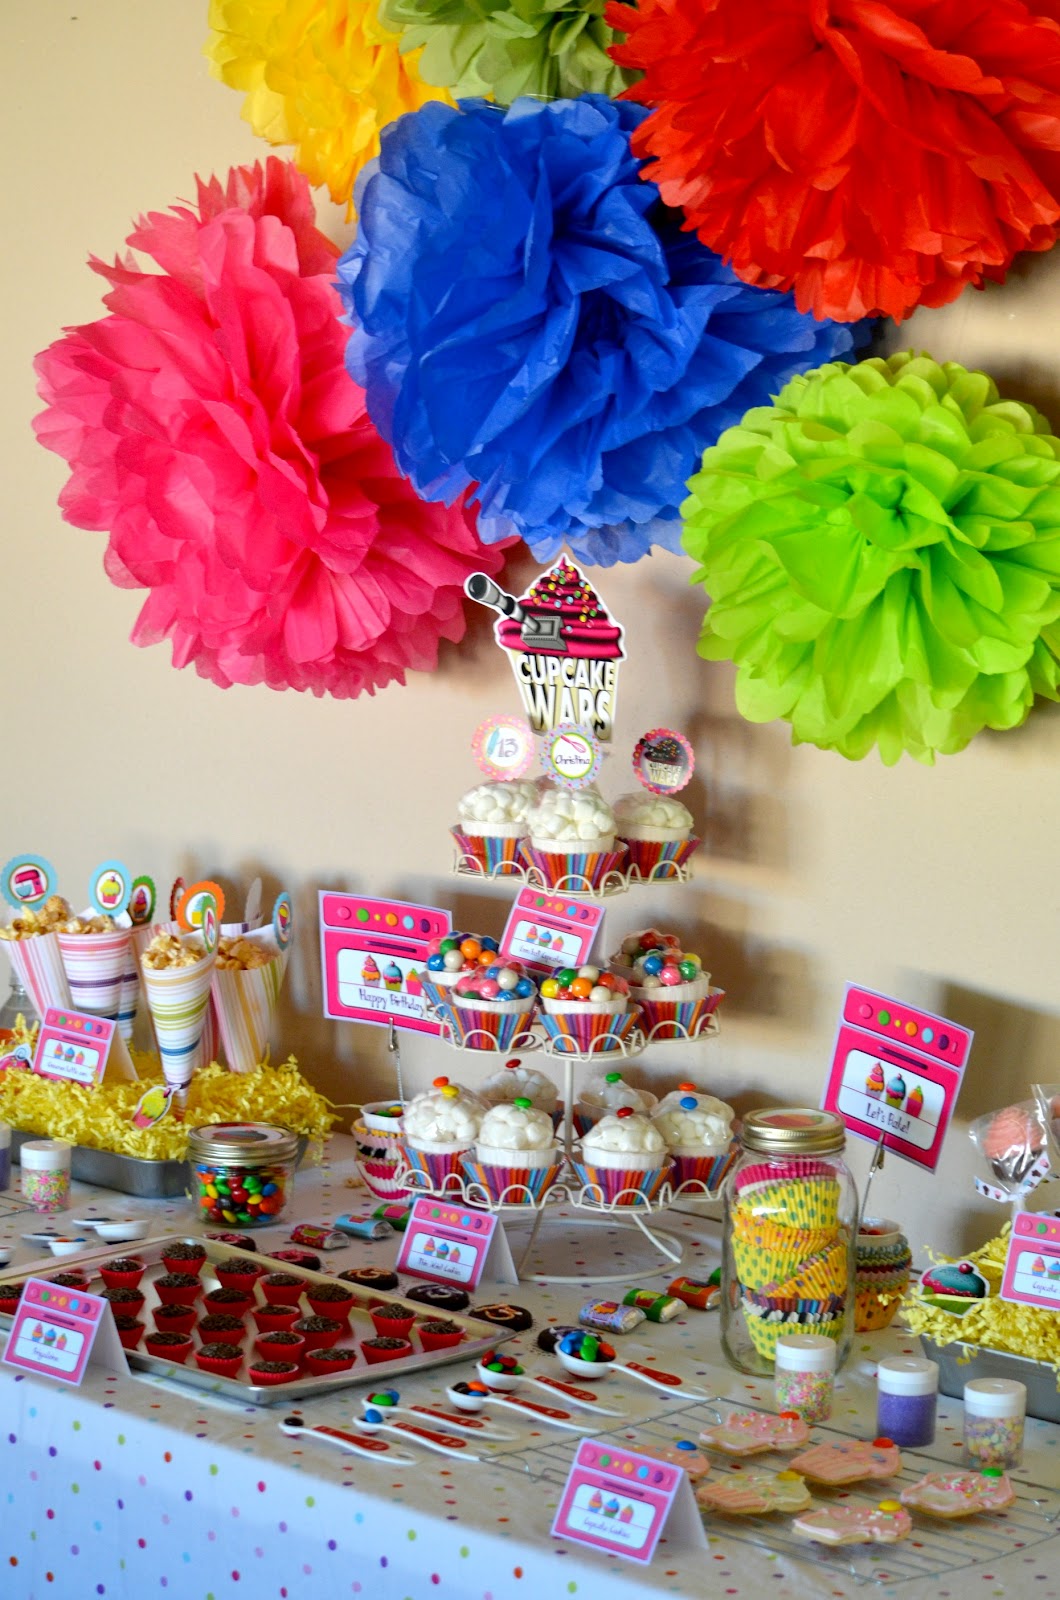 Crissy's Crafts: Cupcake Wars Party